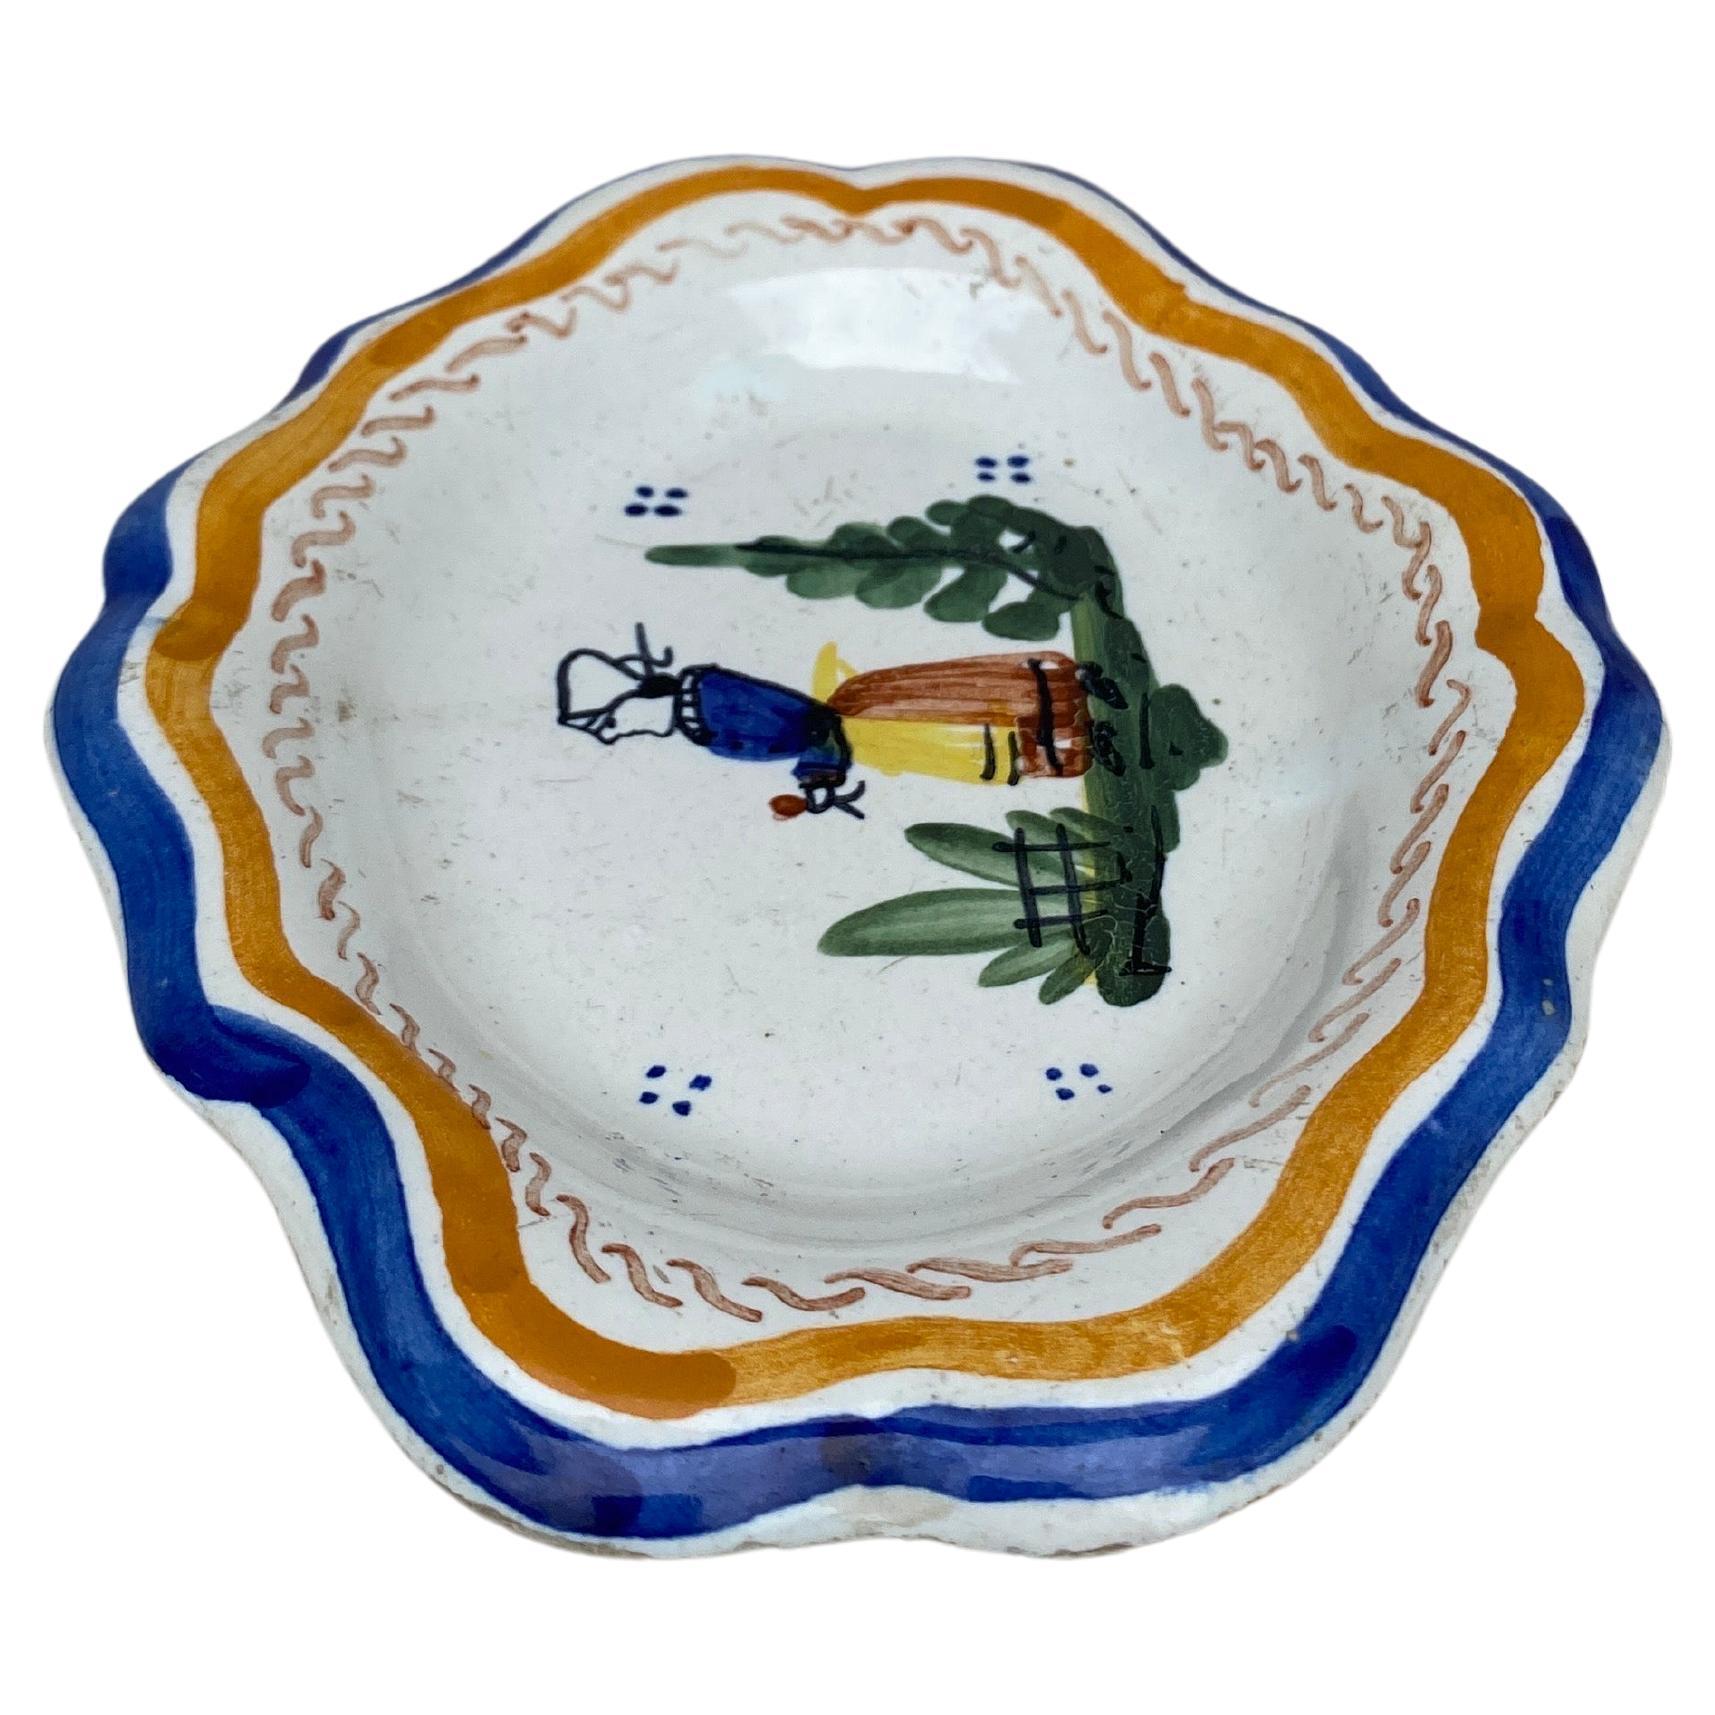 Small French Quimper Platter Henriot Quimper, circa 1920.
6.5 inches by 5 inches.